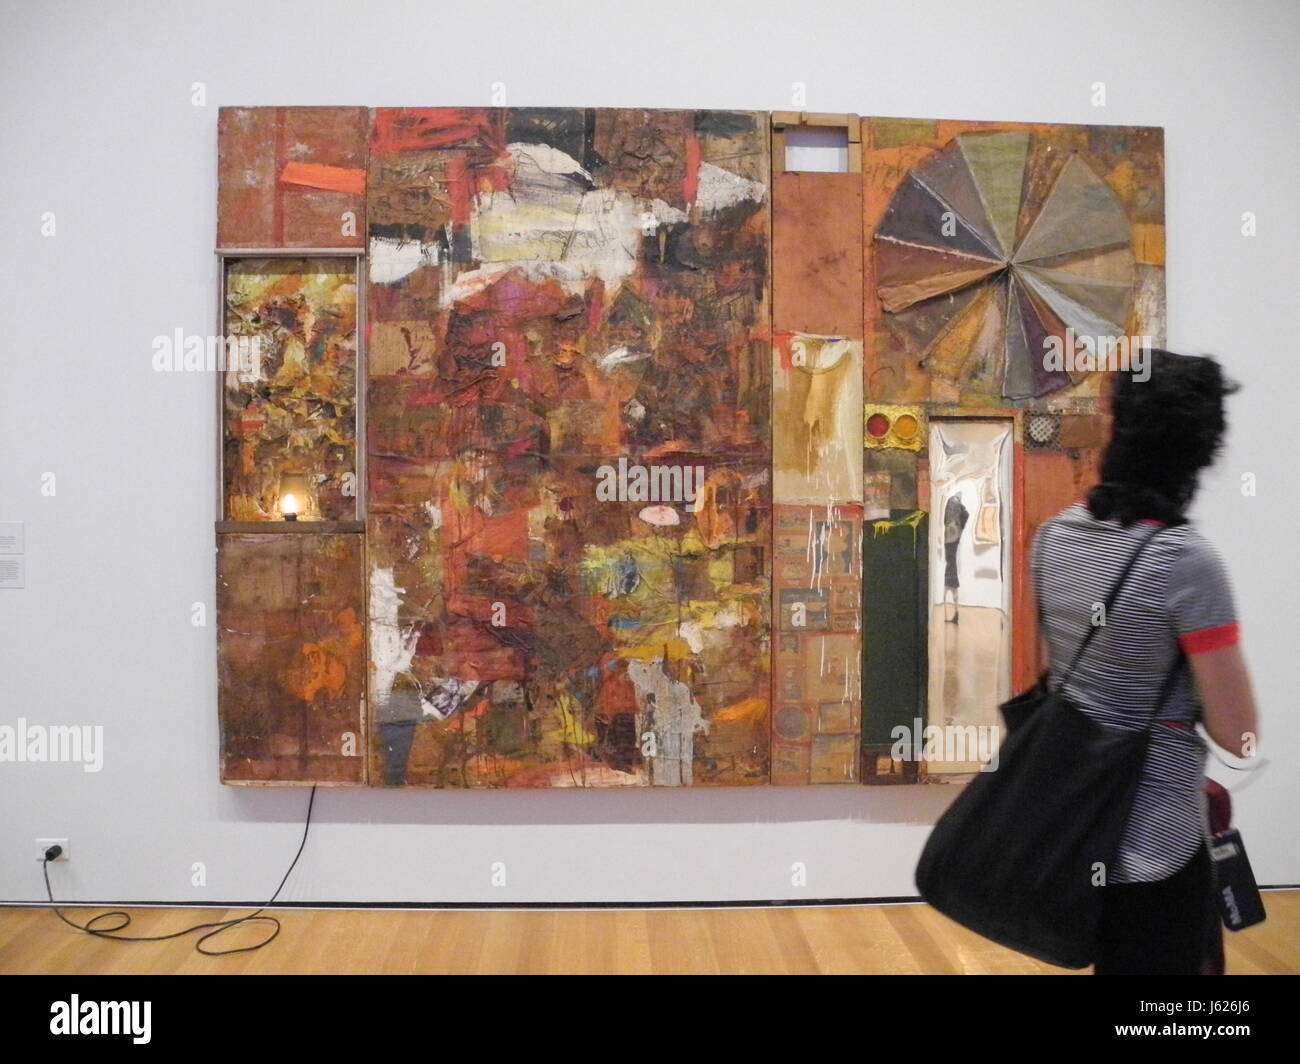 The artwork 'Charlene' by US artist Robert Rauschenberg, part of a retrospective exhibition of Rauschenberg's work which opens on 21 May, at the Museum of Modern Art (MoMA) in New York, 16 May 2017. Photo: Johannes Schmitt-Tegge/dpa Stock Photo